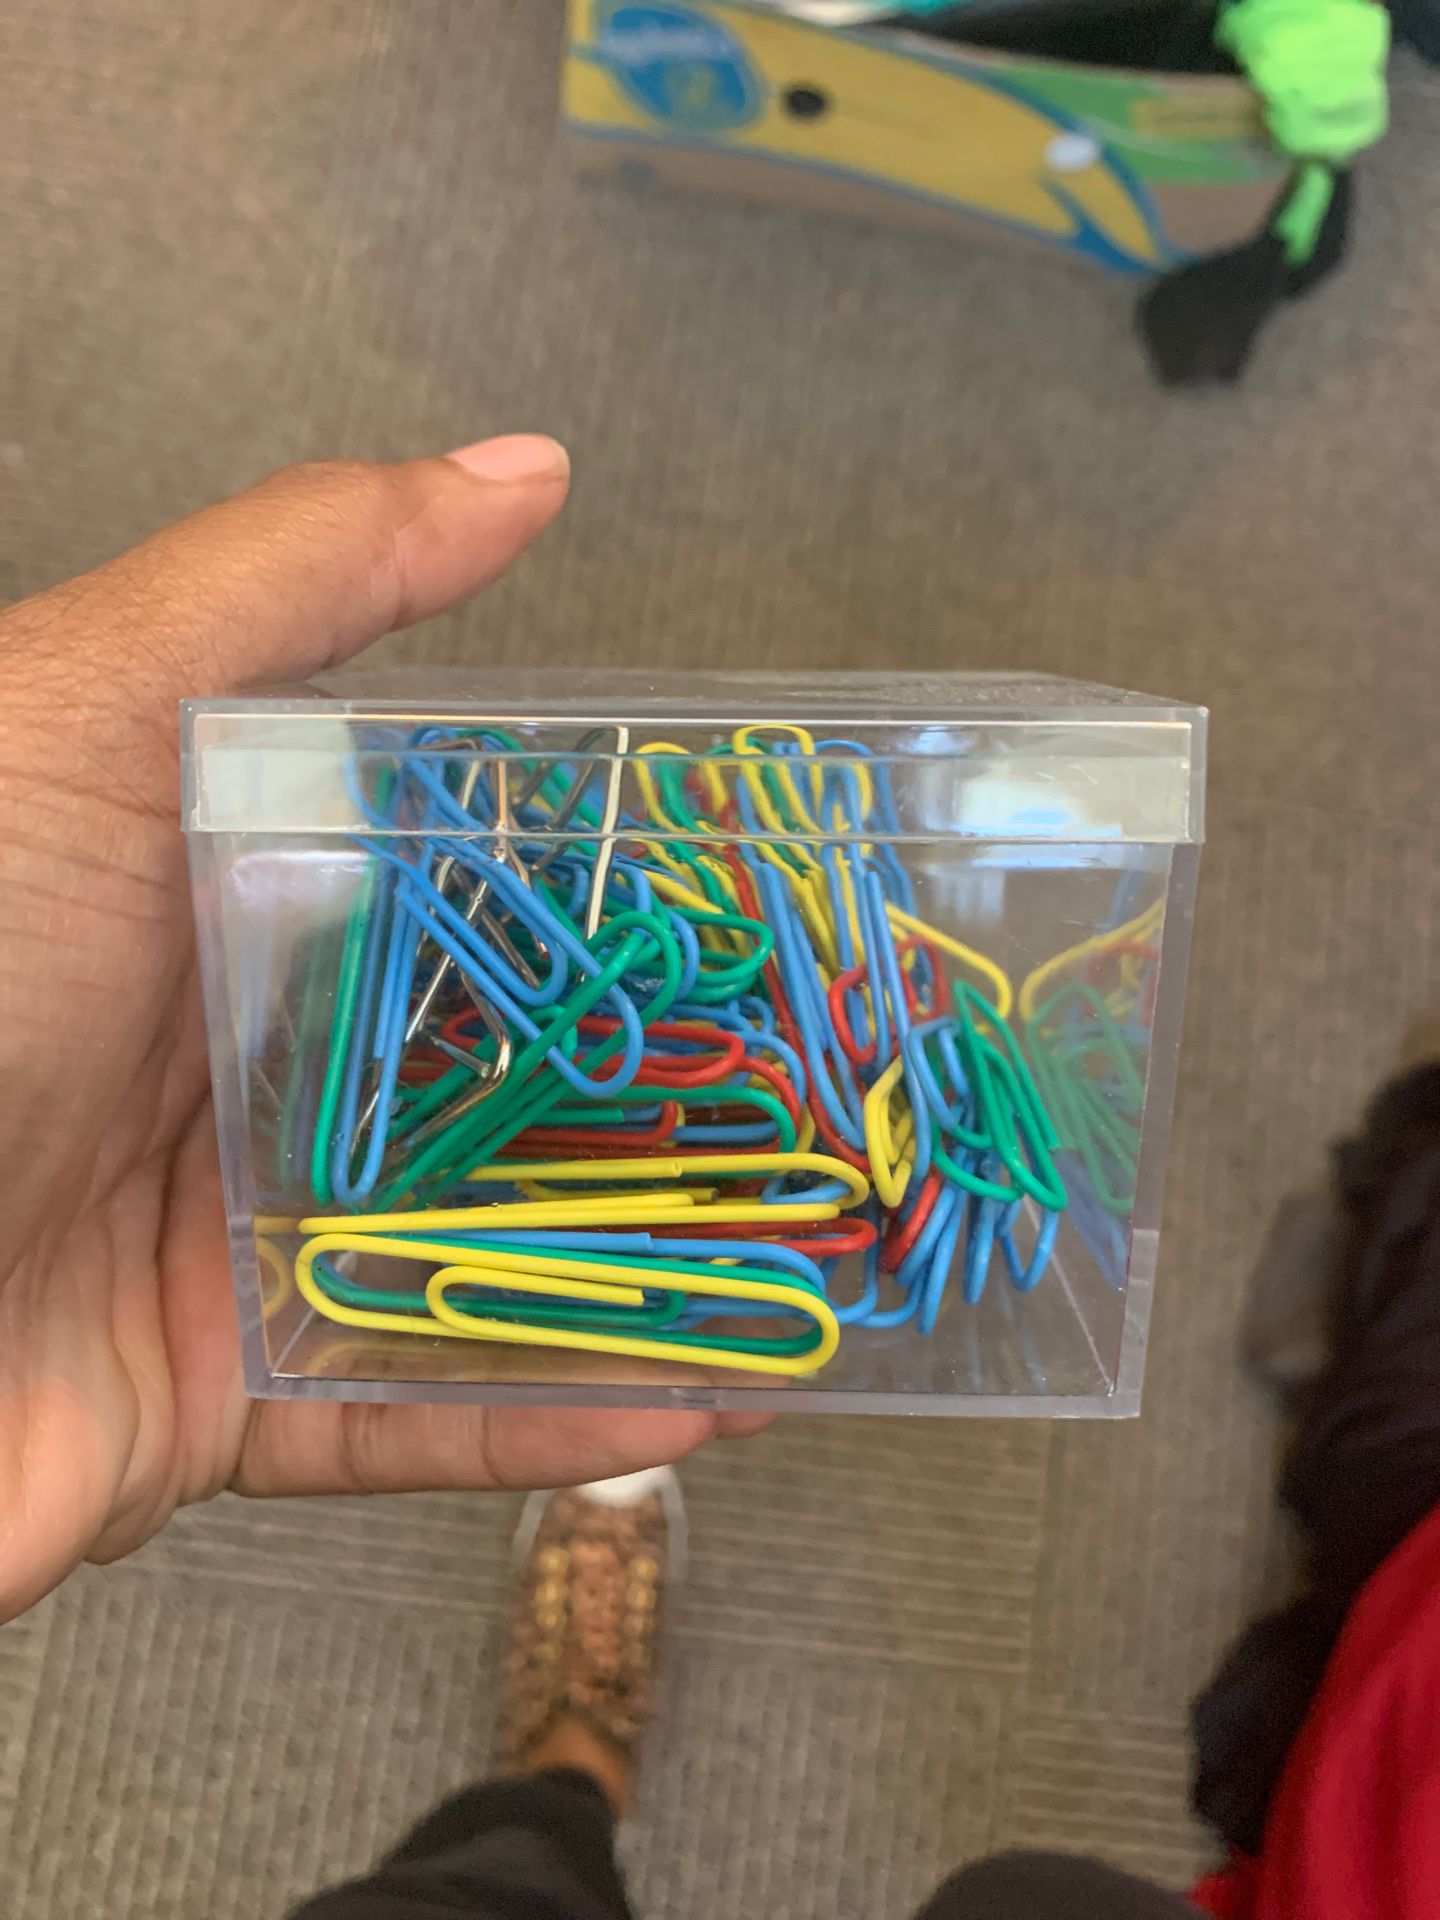 Free box of paper clips to office in need